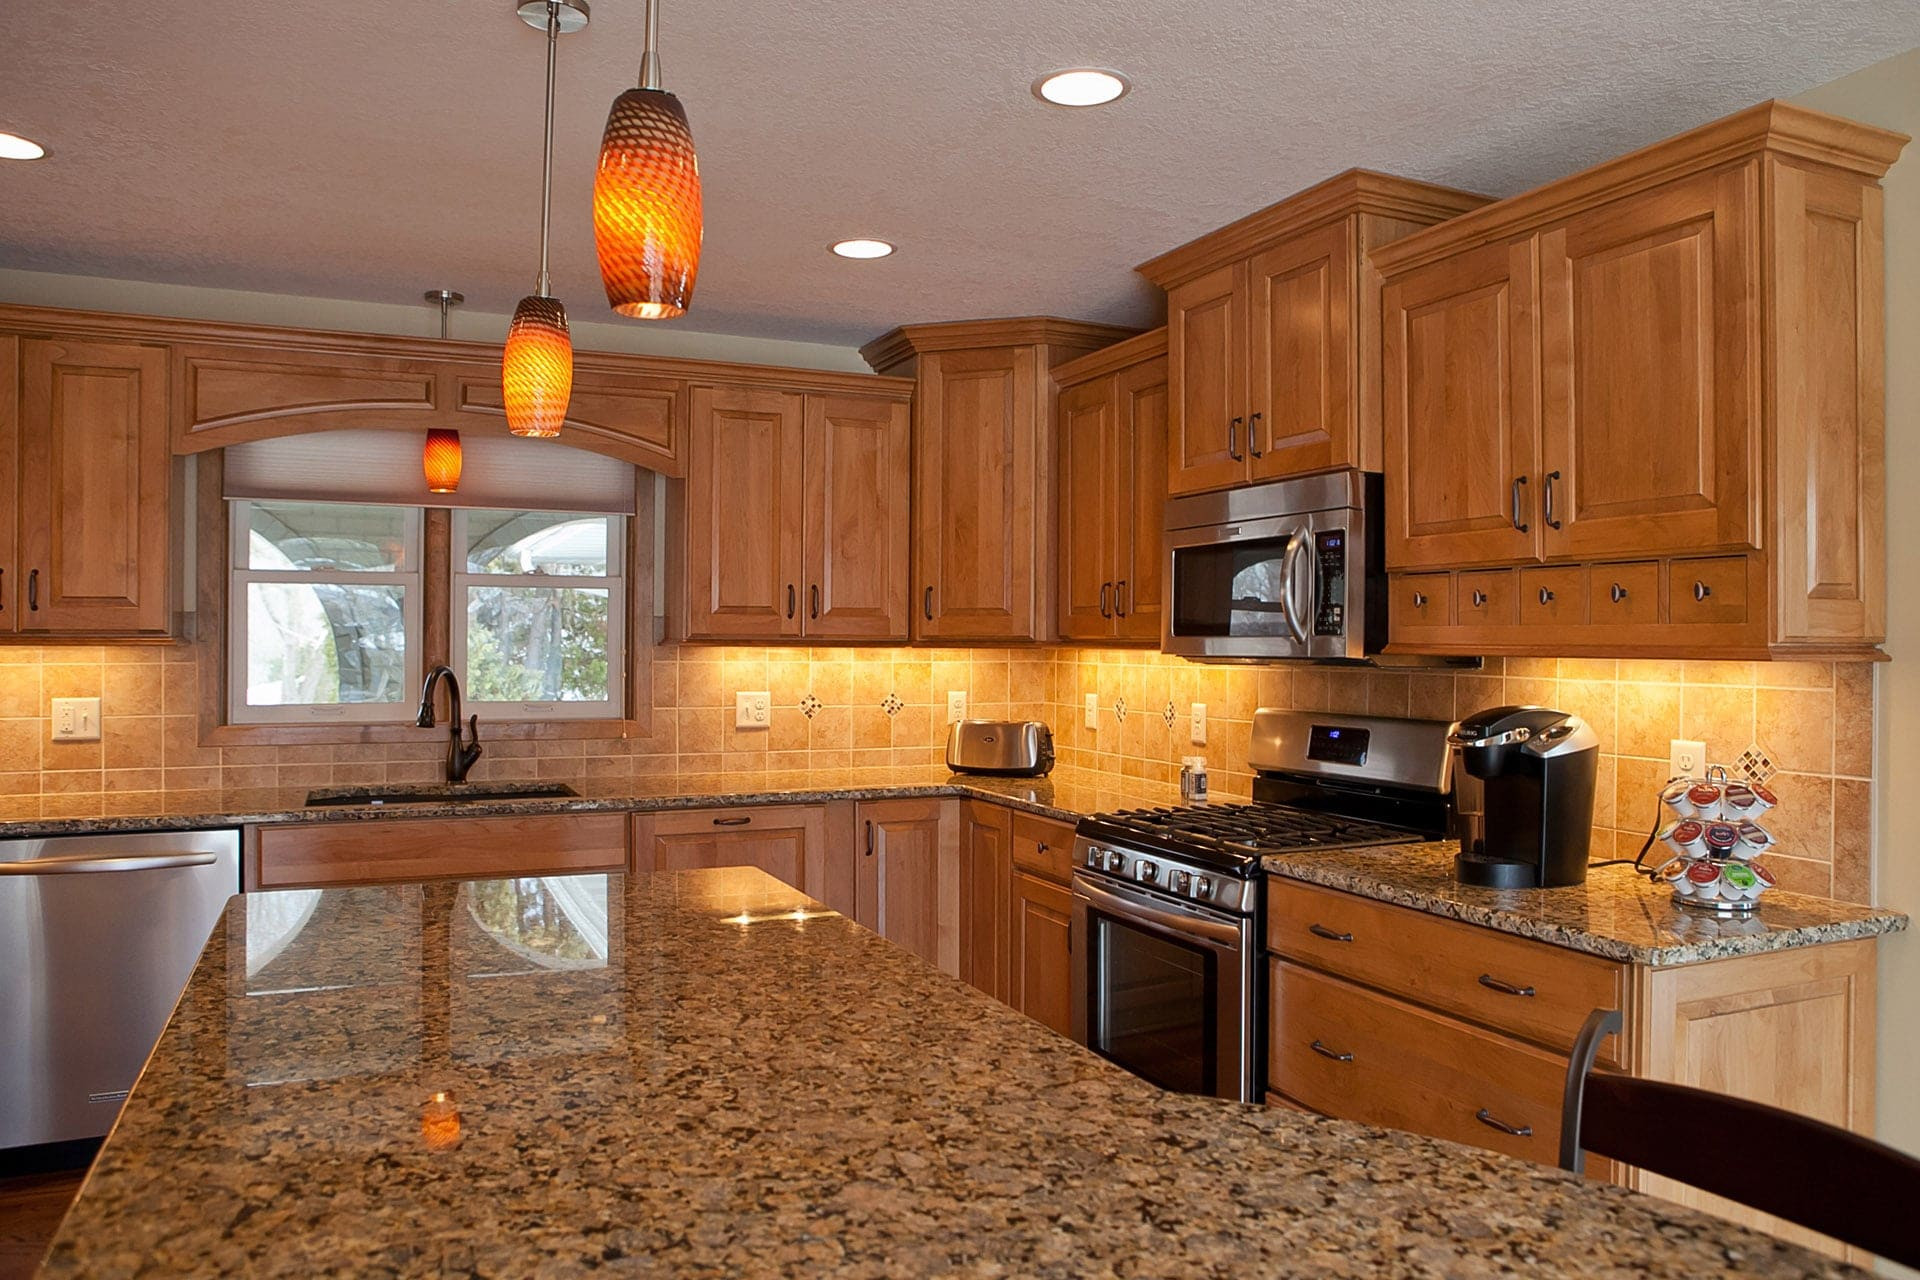 Kitchen Remodel Pic
 Countertops & Remodeling